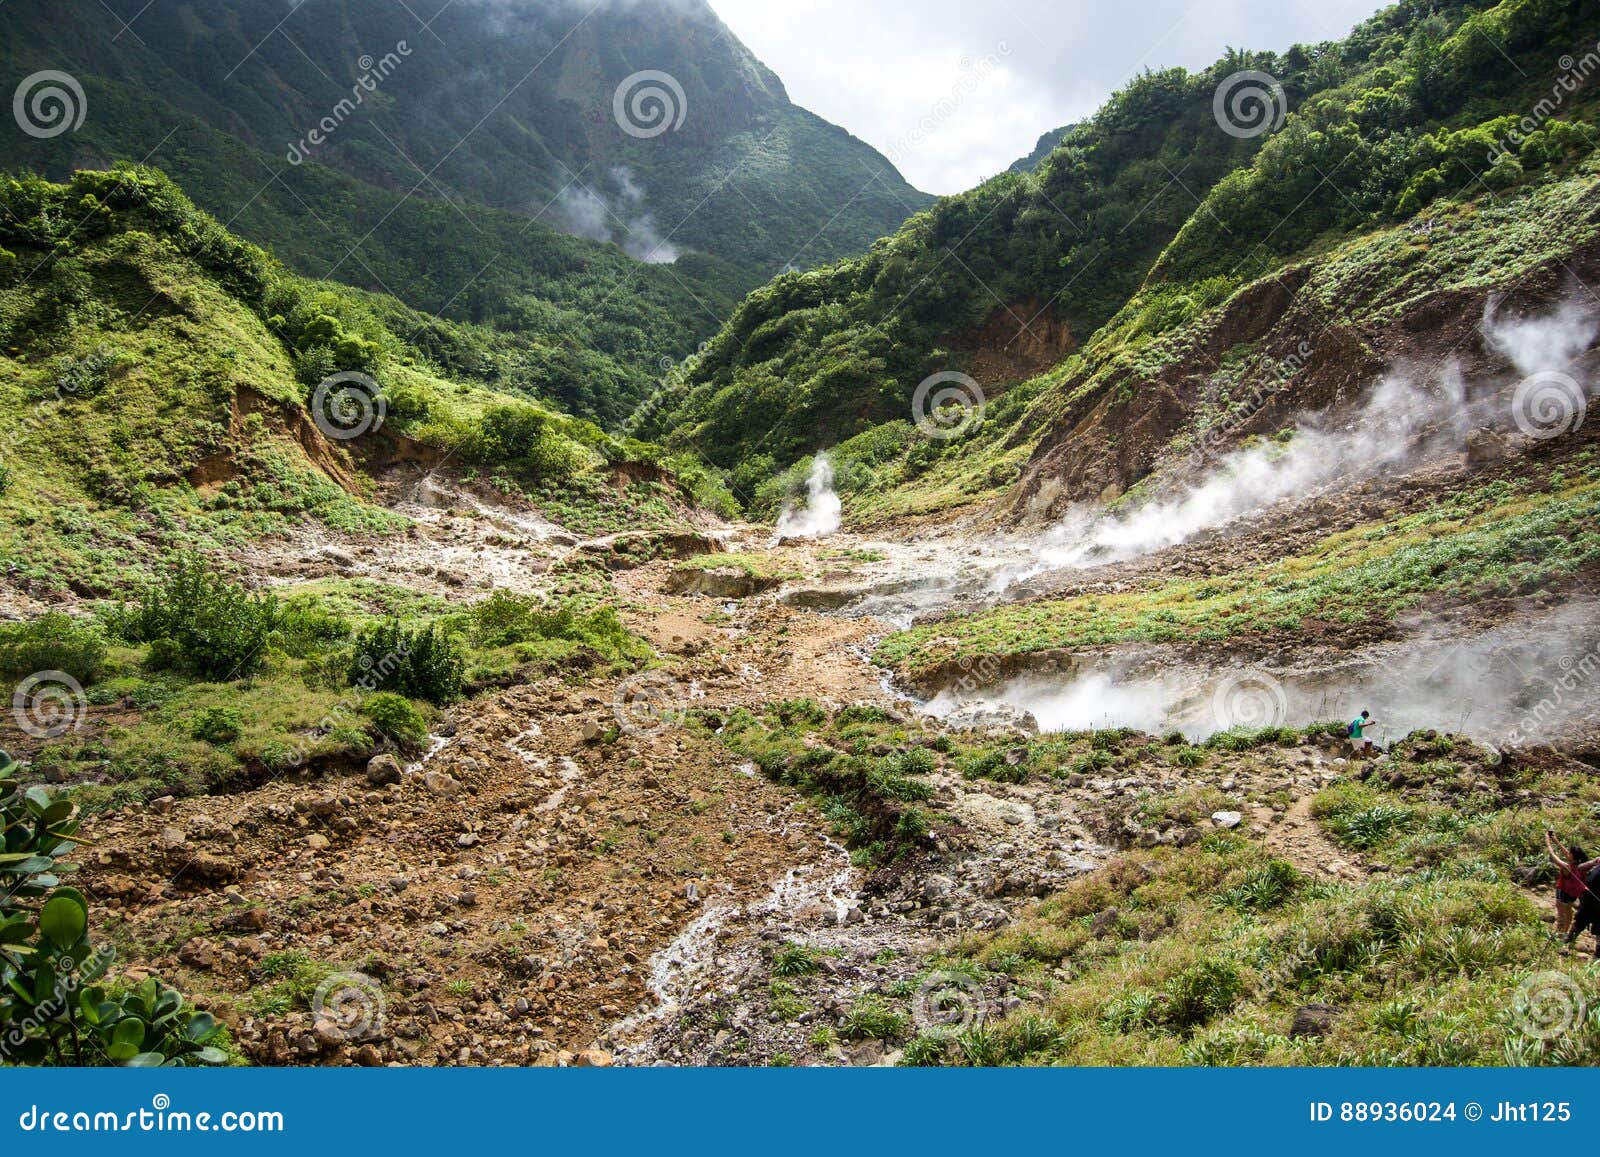 Valley Of Desolation In Dominica Editorial Stock Image Image Of Desolation Island 88936024